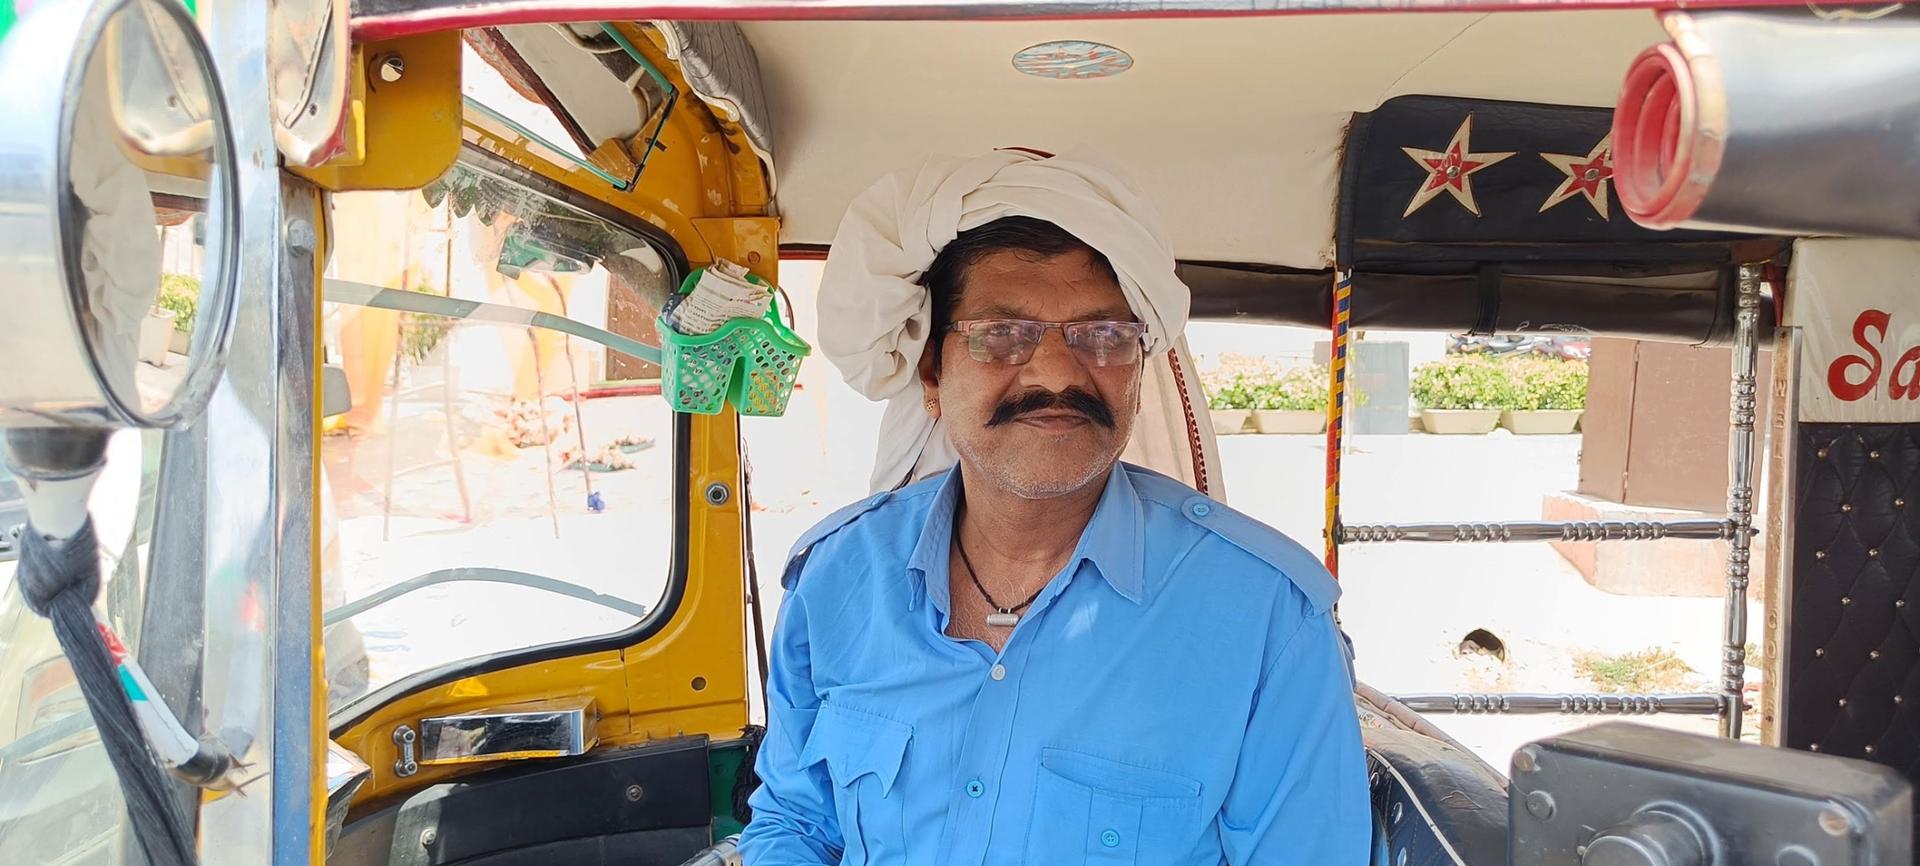  Blue-collar workers like rickshaw driver G. S. Chauhan spend most of their day working outdoors bear the brunt of the heatwave.